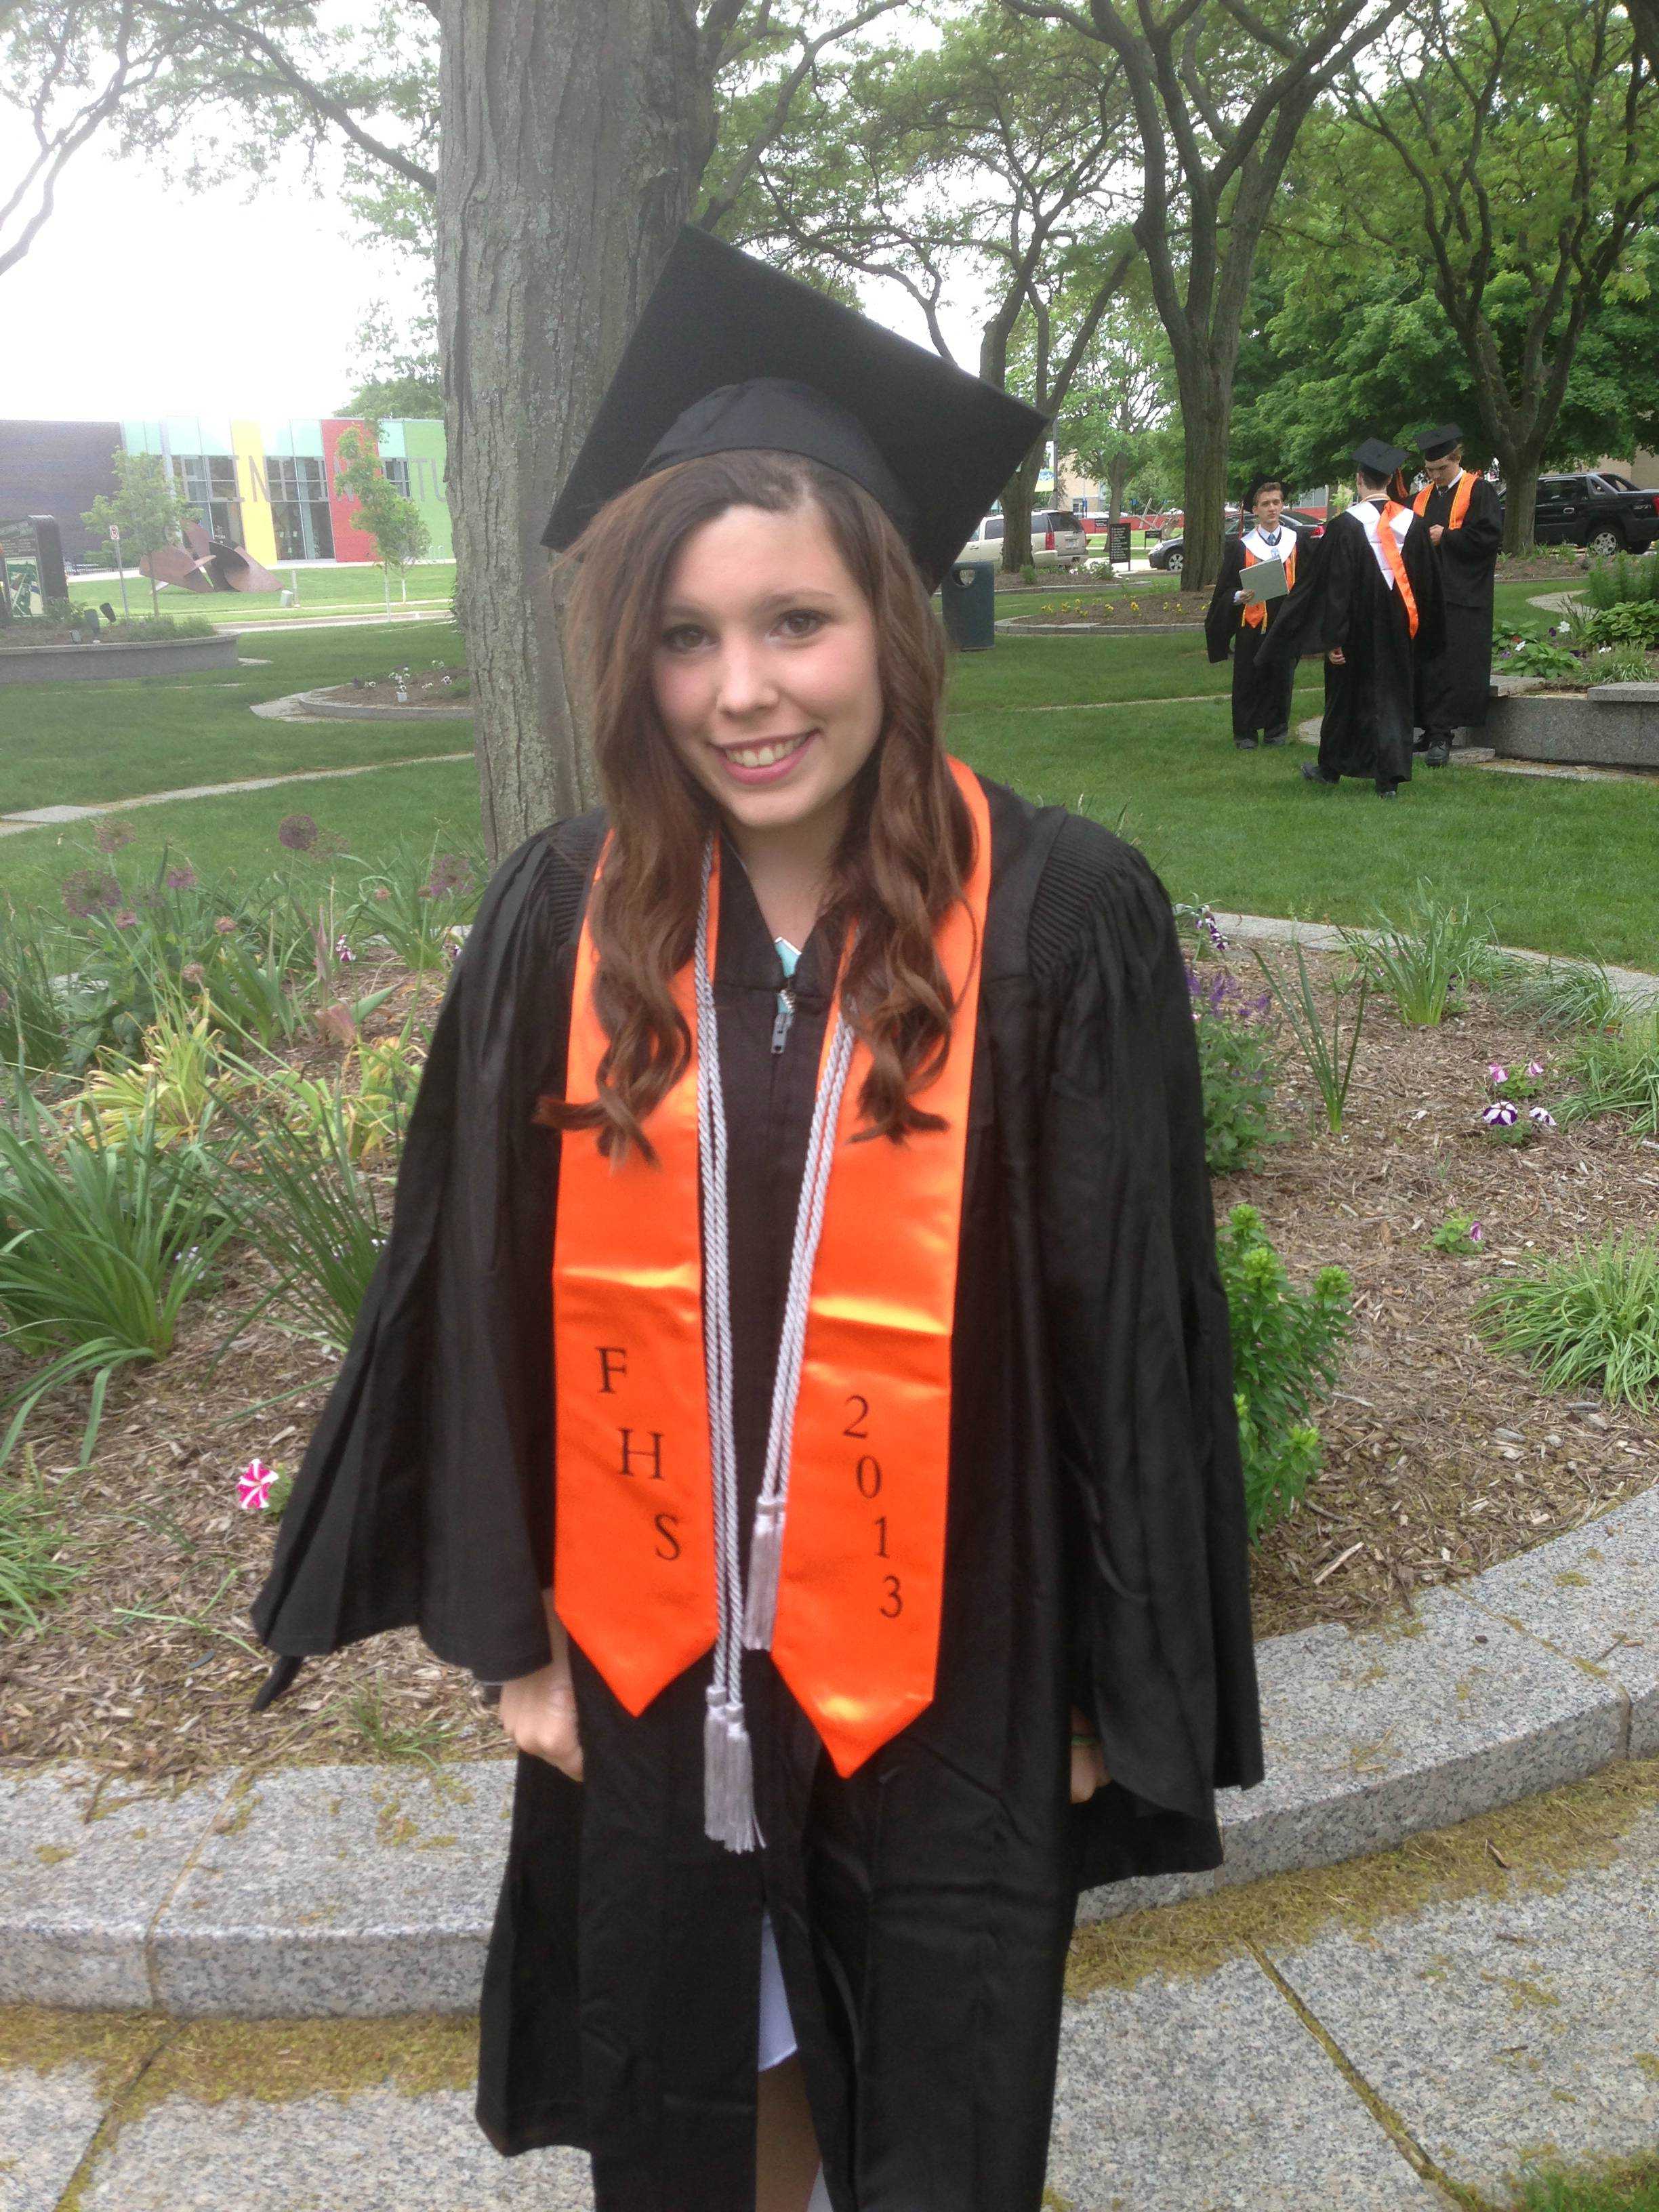 Miss Chelsea Moore smiles while wearing her Flushing High School graduation gown in 2013.